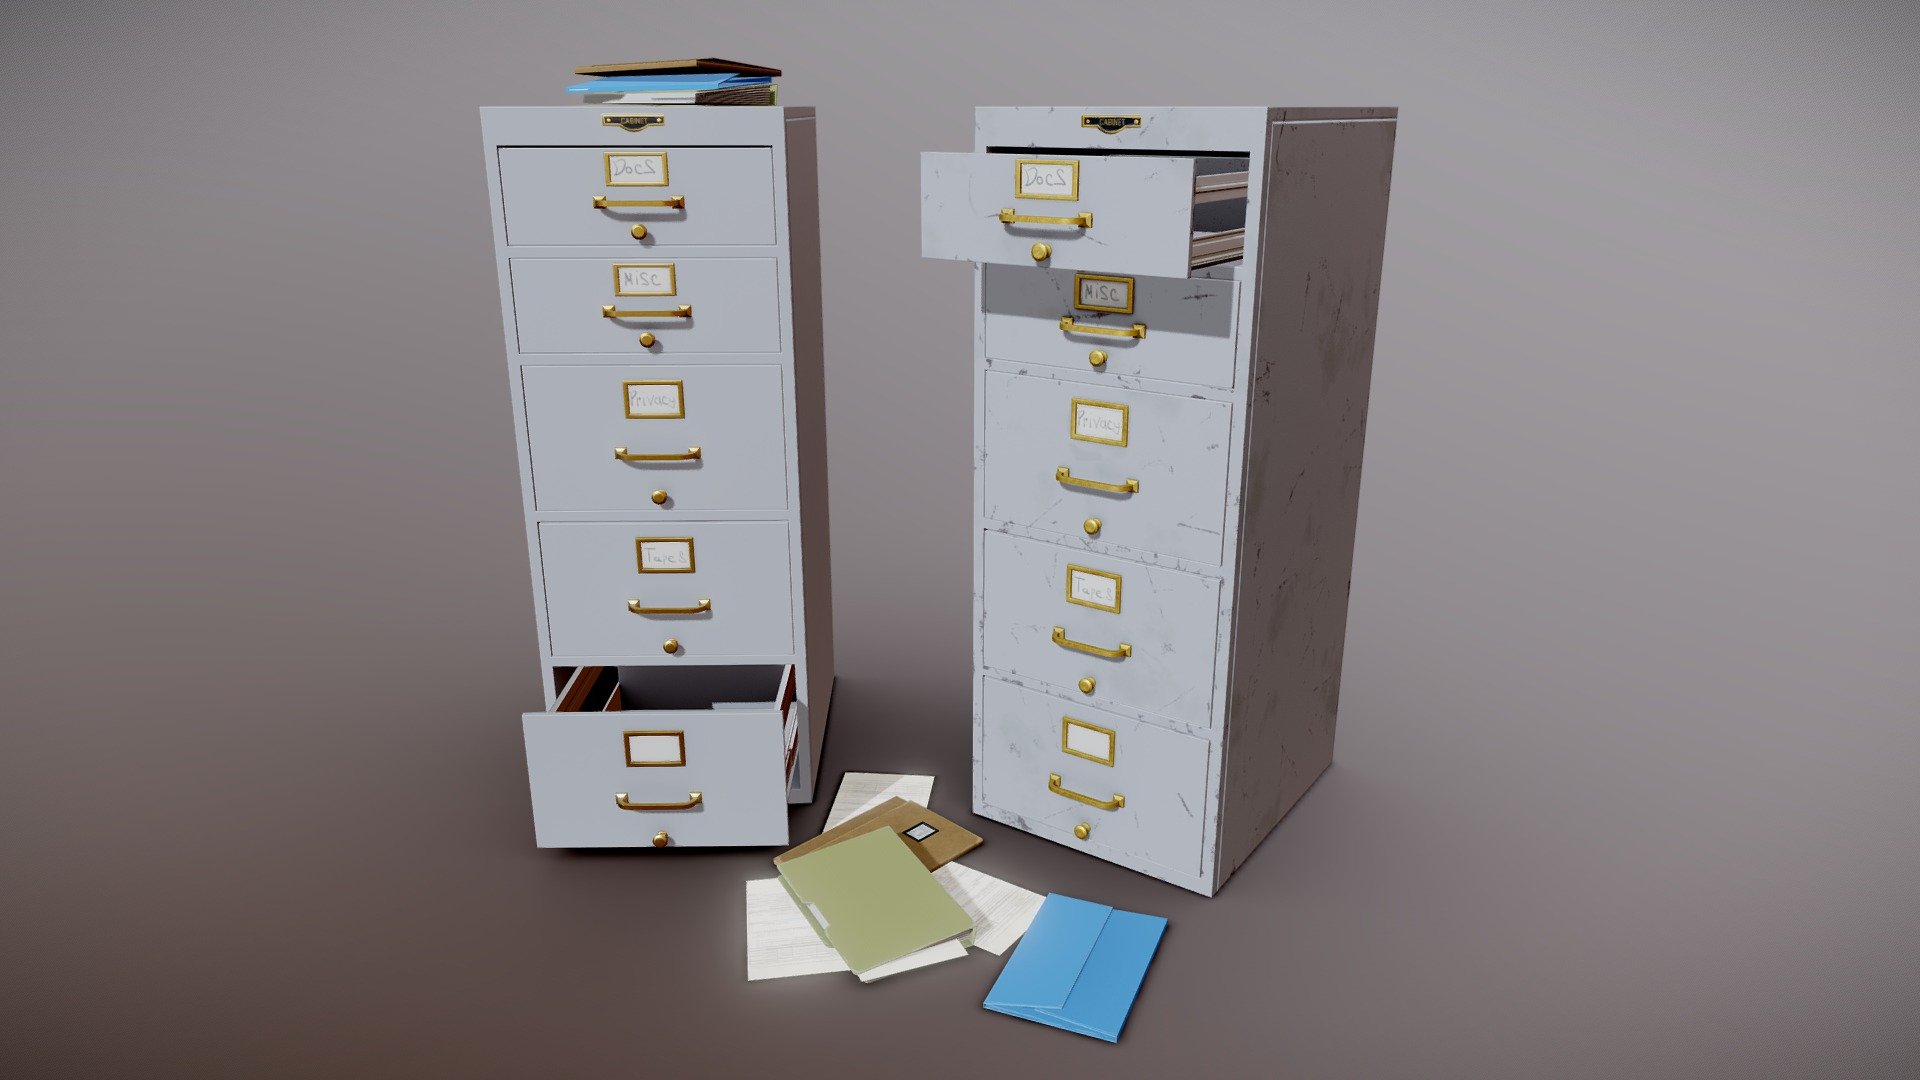 Realistic Vintage Filling Cabinet with High Quality PBR Textures.

Blend, FBX, UnityPackages (2019.4, Built-In/URP/HDRP) formats.

Materials and textures included.

Metallic/Roughness PBR, Unity Built-In/URP/HDRP and UE4 Texture Sets Dirty and Clean 4096px PNG 8Bit Textures.

Model by @Bek, Idea and Art Direction by Me 3d model